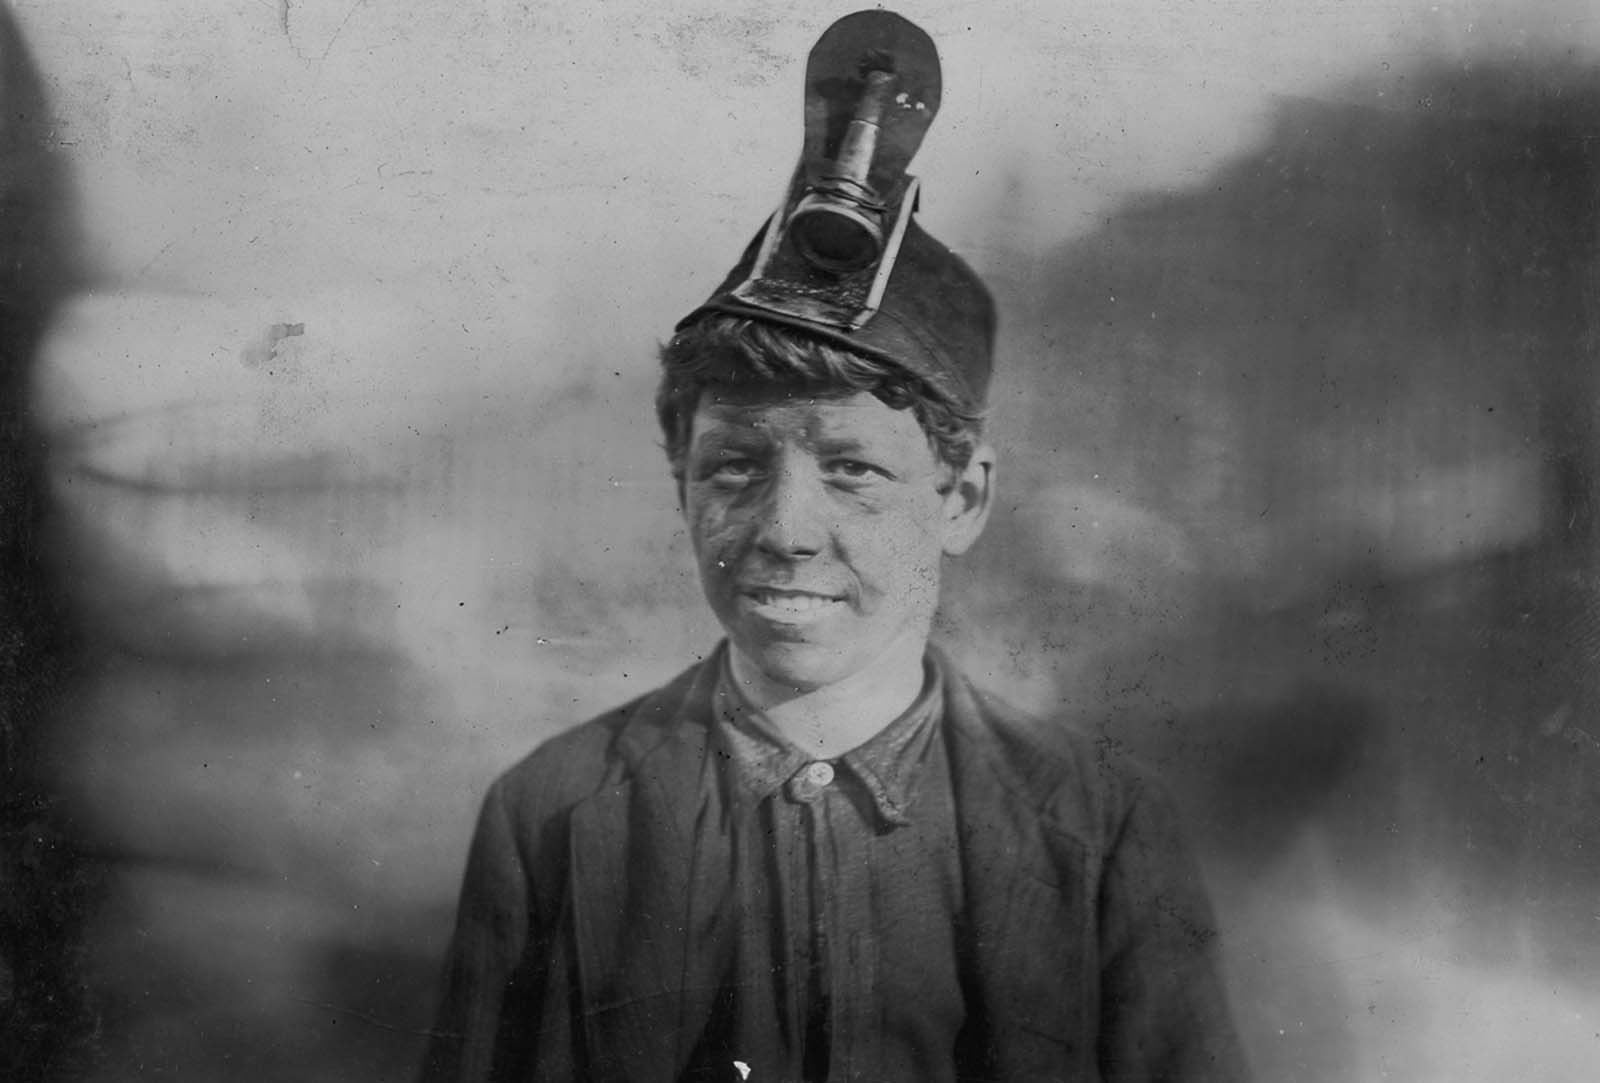 Frank, age 14. He had been working in a mine for three years and had been hospitalized for a year when his leg was crushed by a coal car, 1906